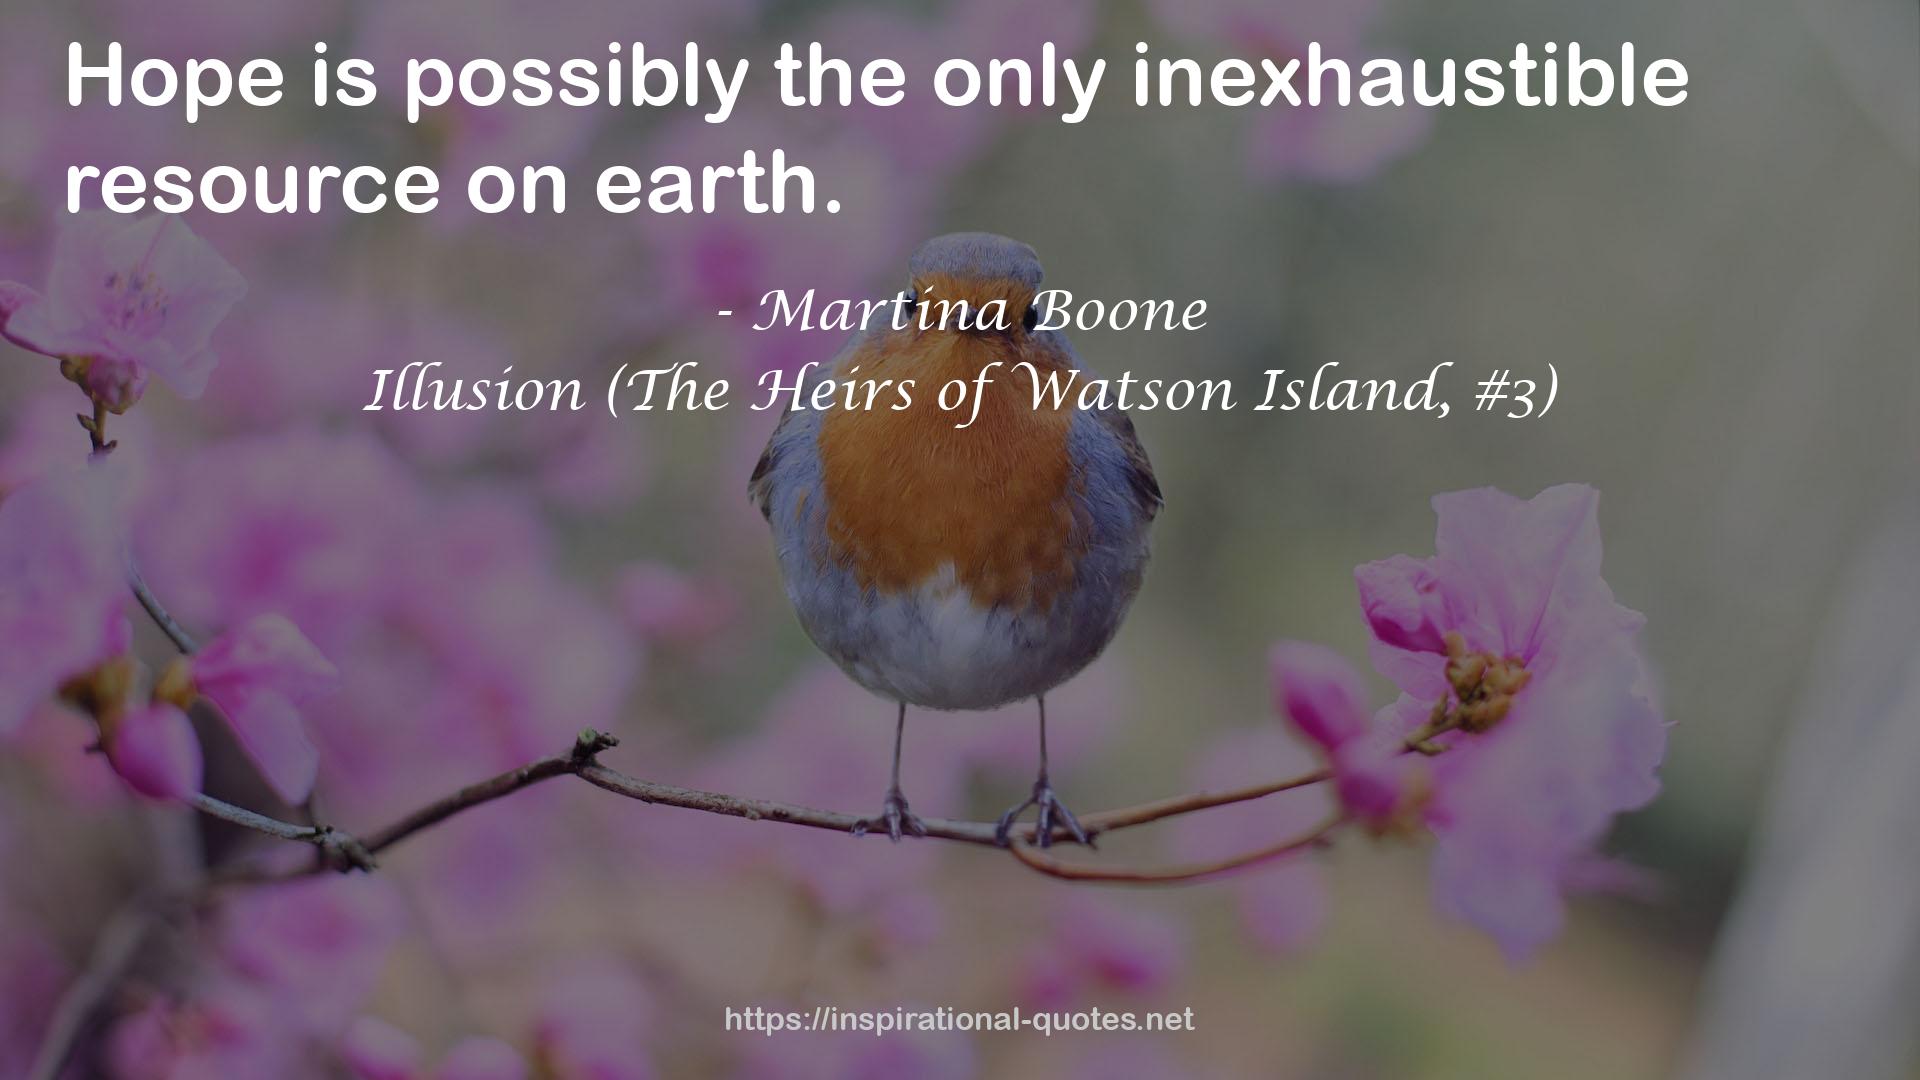 Illusion (The Heirs of Watson Island, #3) QUOTES